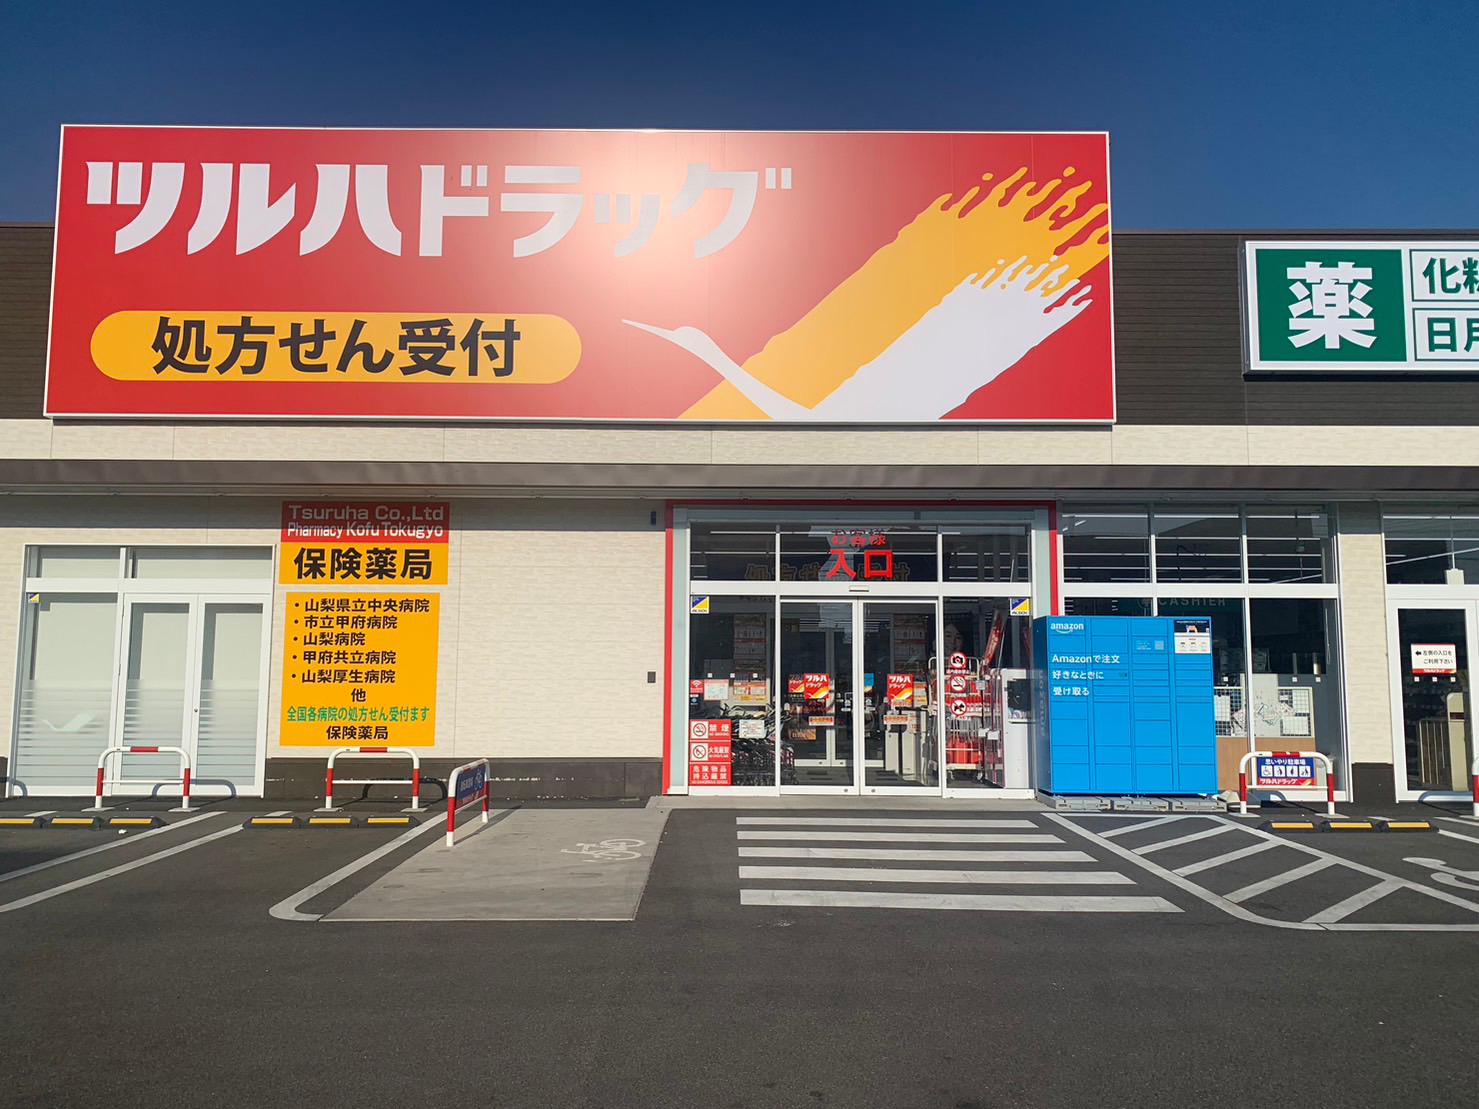 Images ツルハドラッグ 甲府徳行店